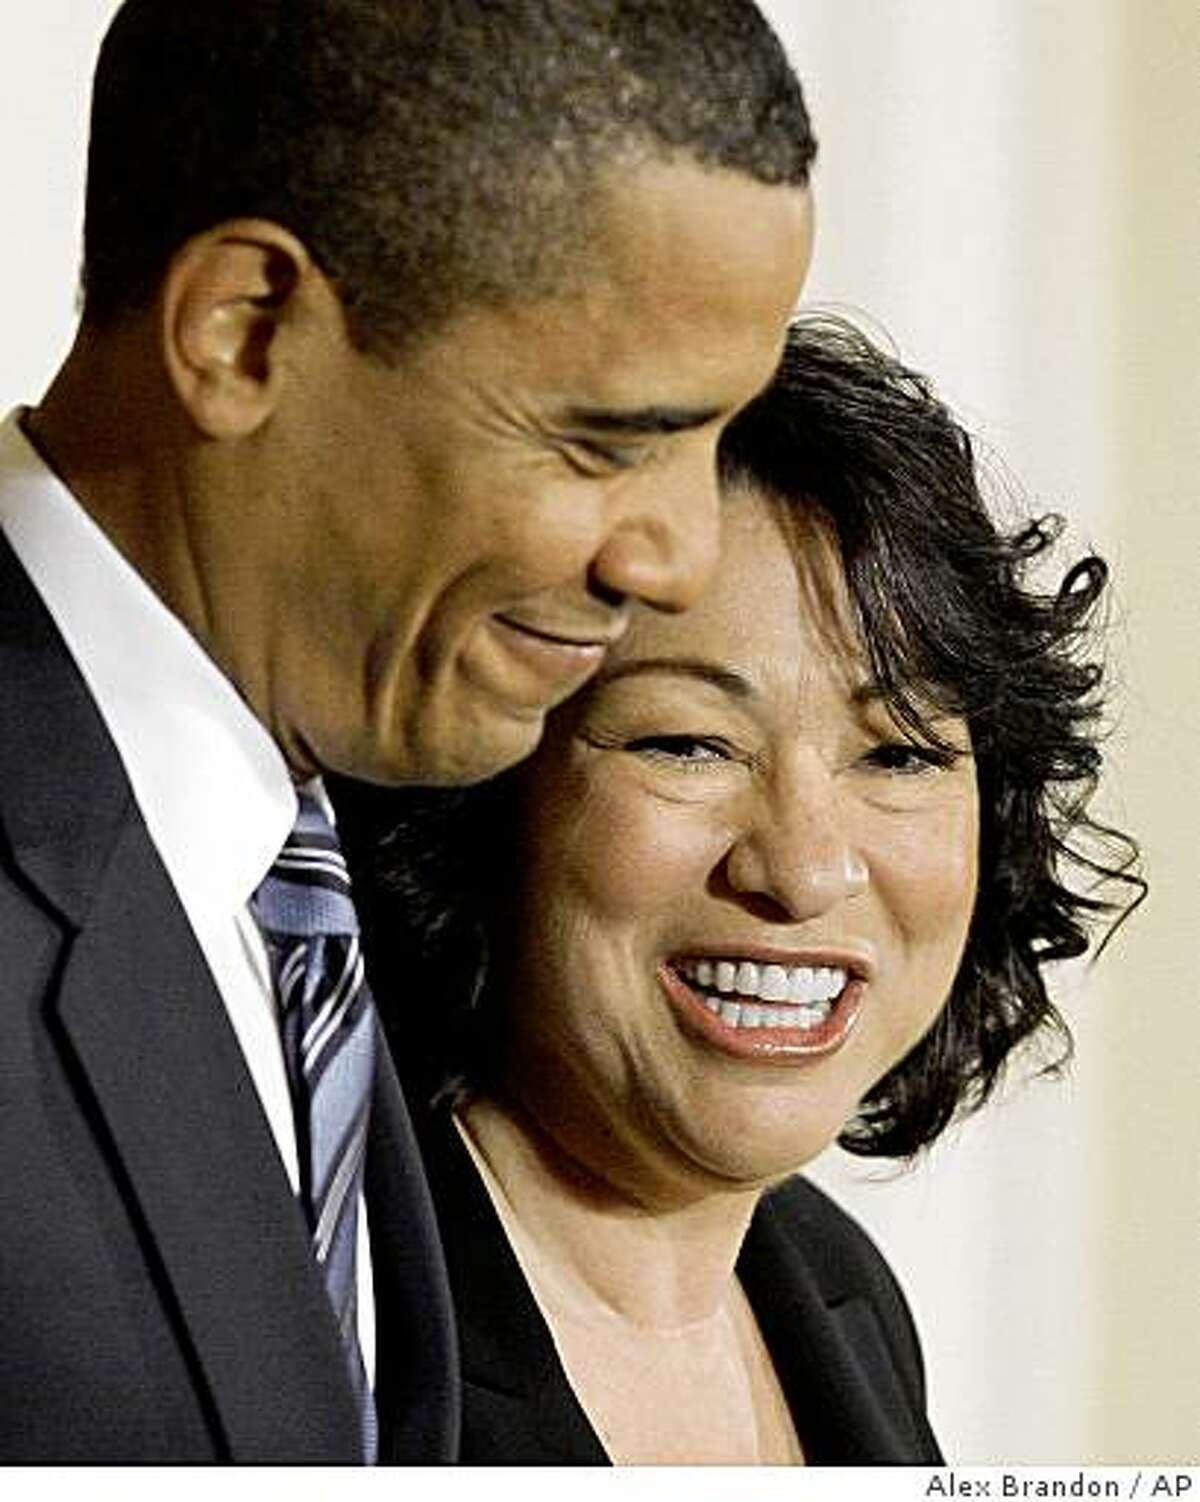 President Barack Obama announces federal appeals court judge Sonia Sotomayor, right, as his nominee for the Supreme Court, Tuesday May 26, 2009, in the East Room of the White House in Washington. (AP Photo/Alex Brandon)